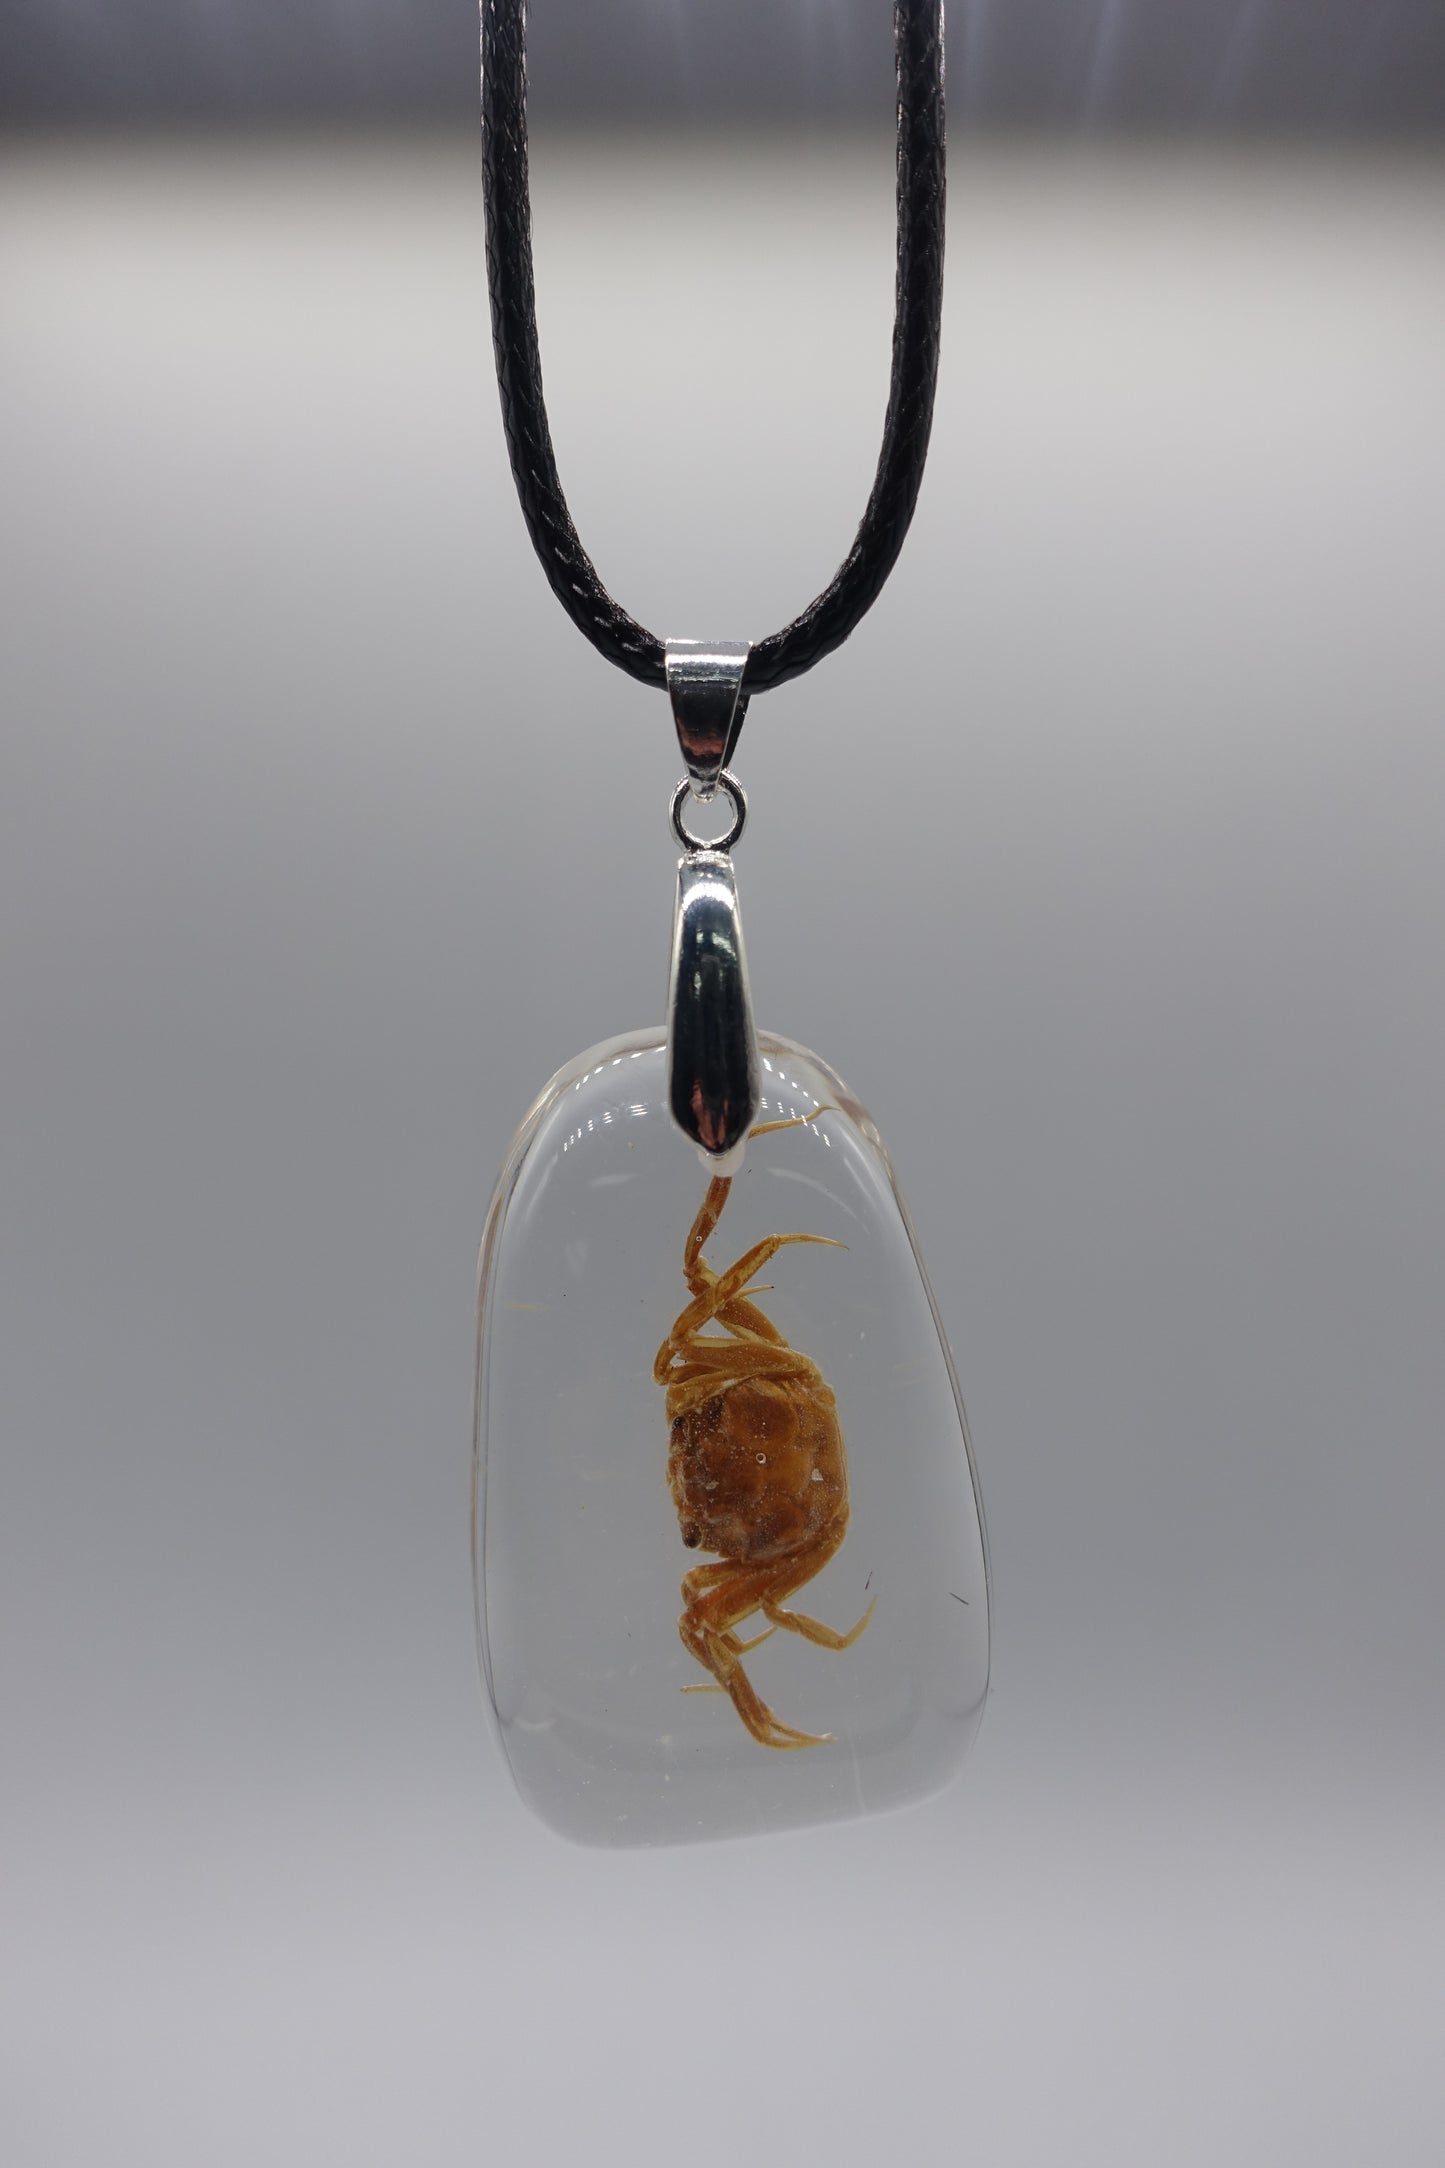 crab necklace real insect melted into resin beach souvenir FANTASTIC